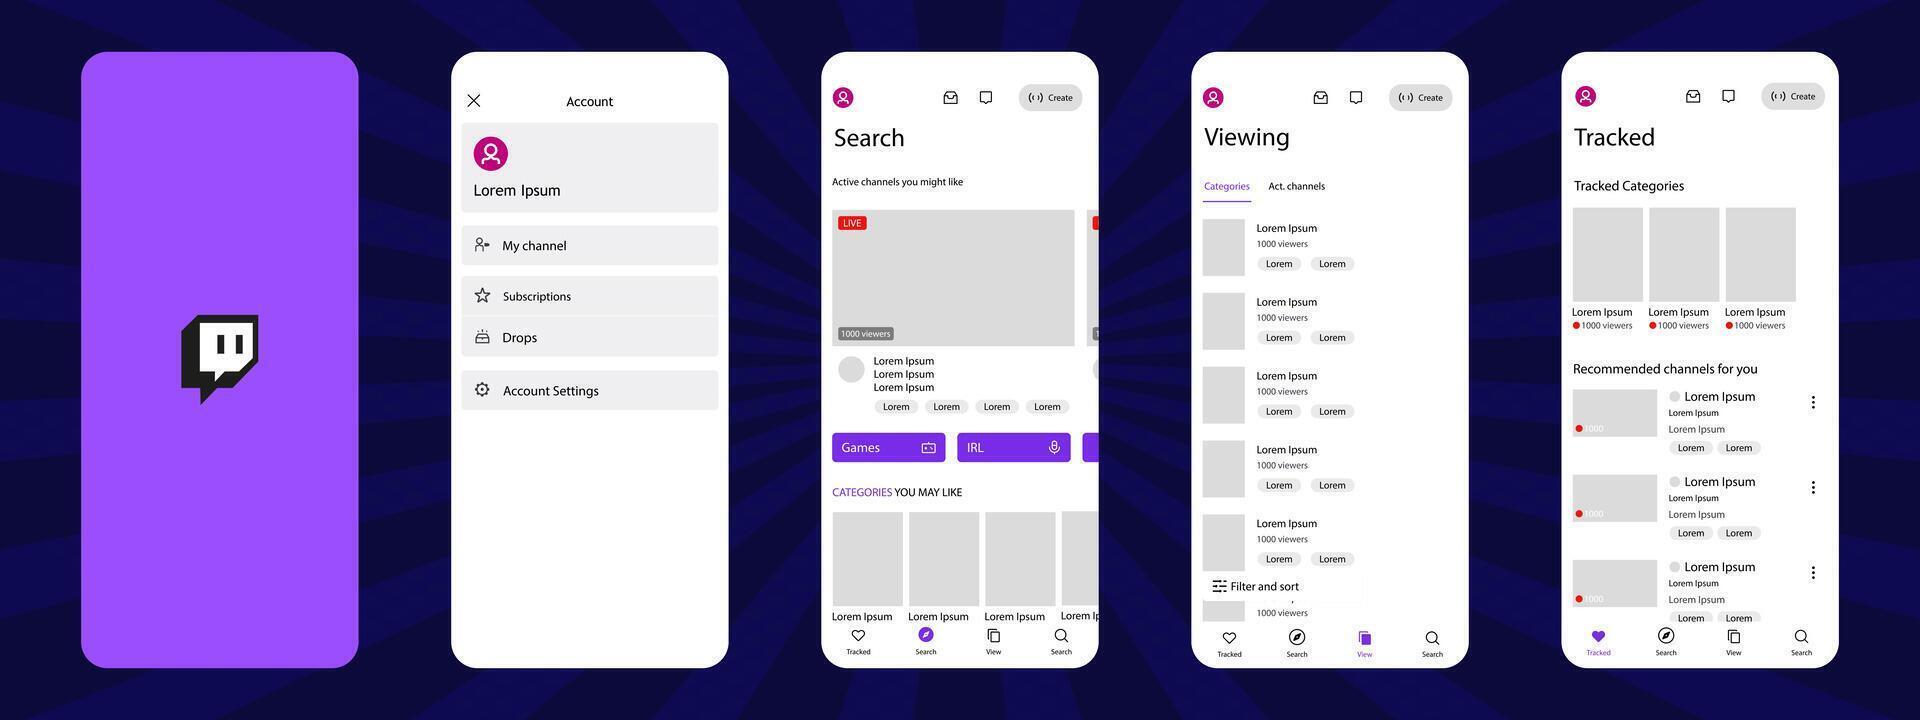 Twitch mobile interface. Twitch screen social media, streaming platform interface template. Homepage, logo, recommendations, subscription, profile. Glassmorphism. Editorial illustration vector